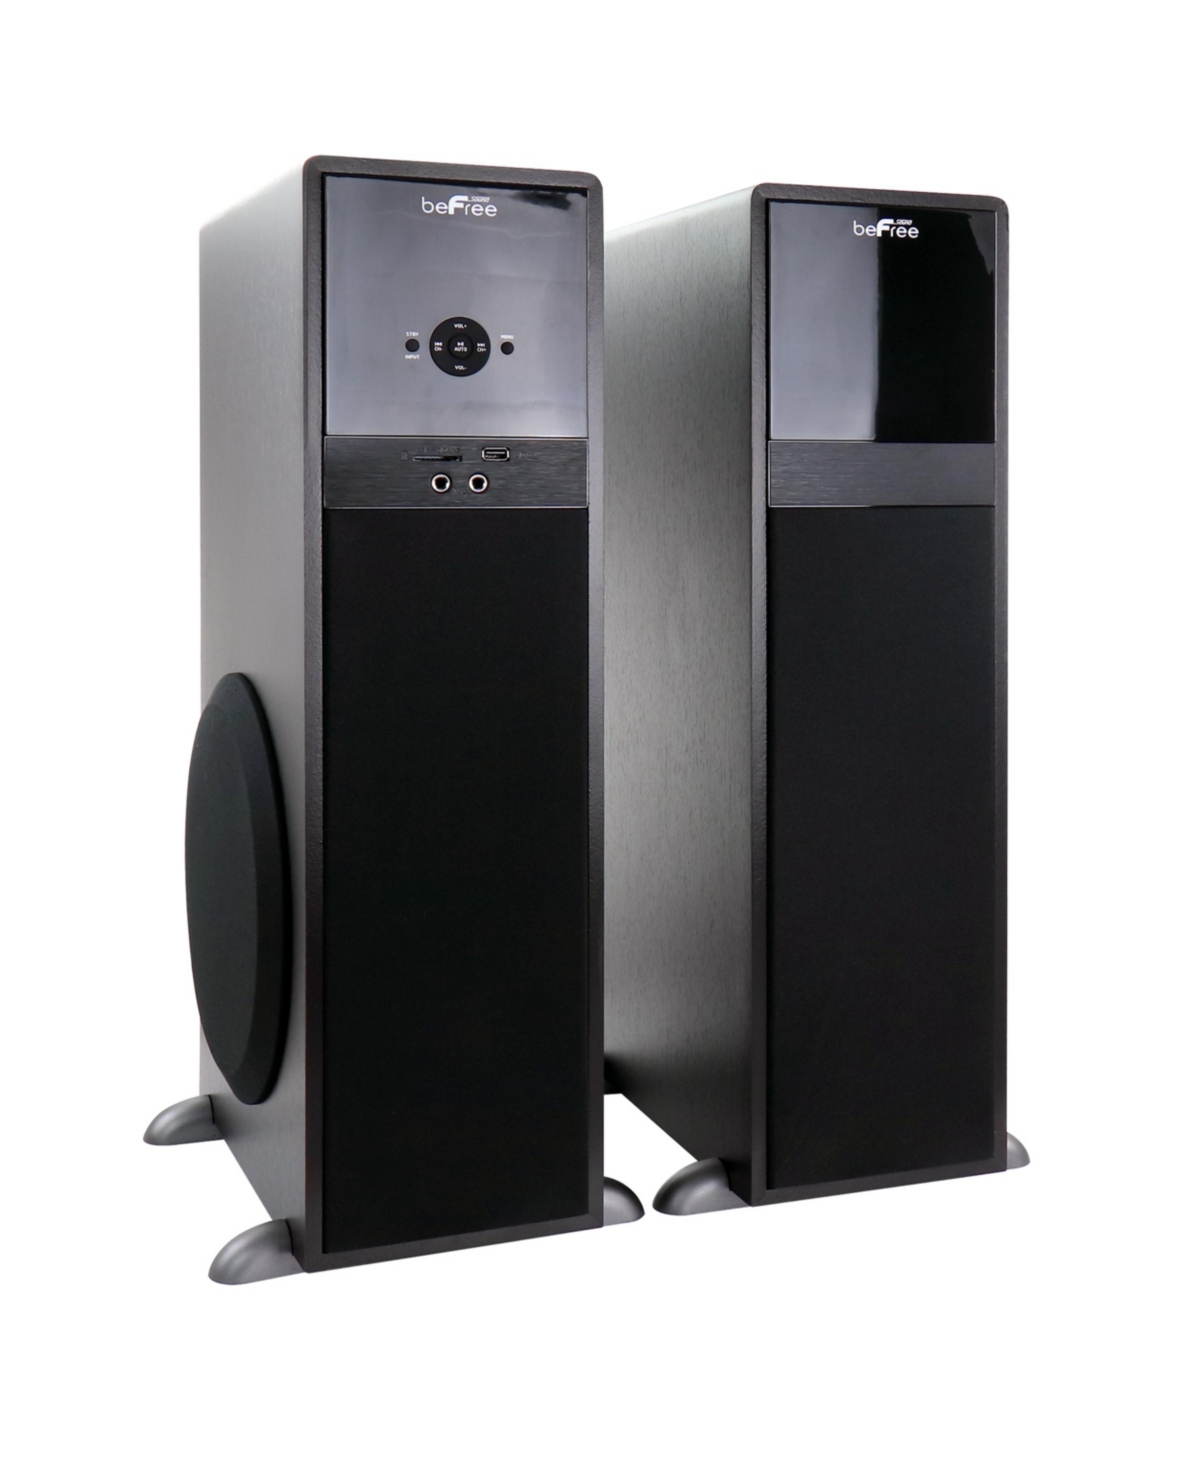 beFree Sound Bfs-750 2.1 Channel 80 Watt Bluetooth Tower Speakers with Remote and Microphone - Black